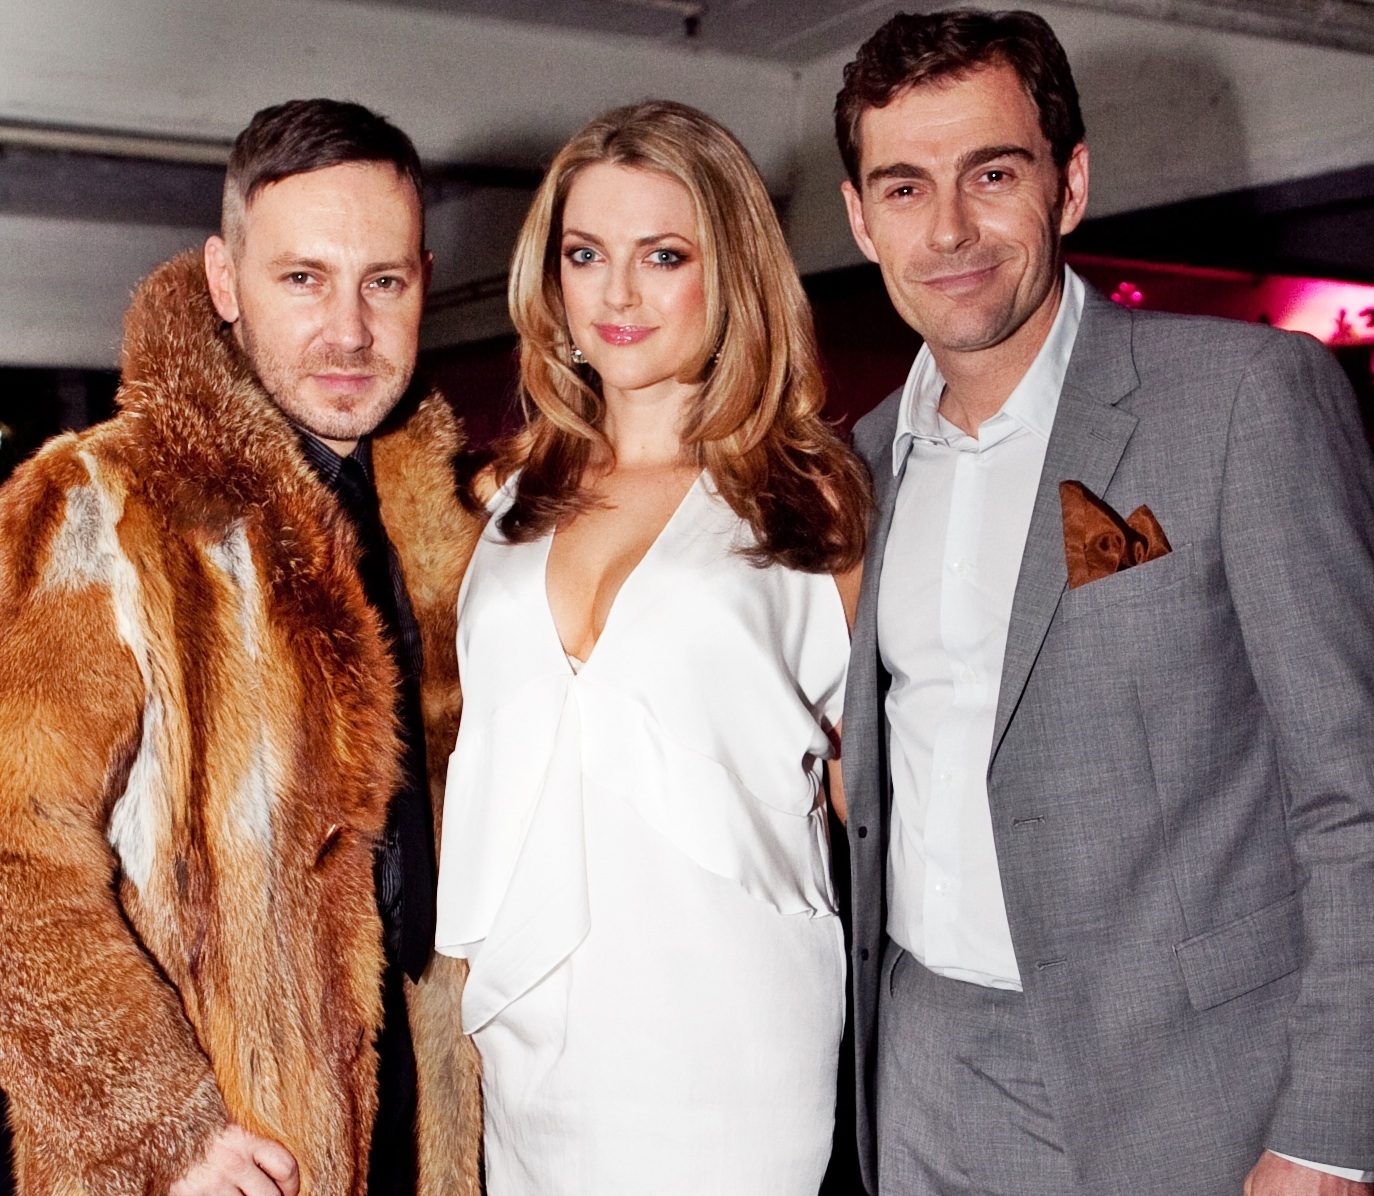 Philip Boon, Virginia Bowers and Dennis Kreusler at Melbourne Spring Fashion Week Launch